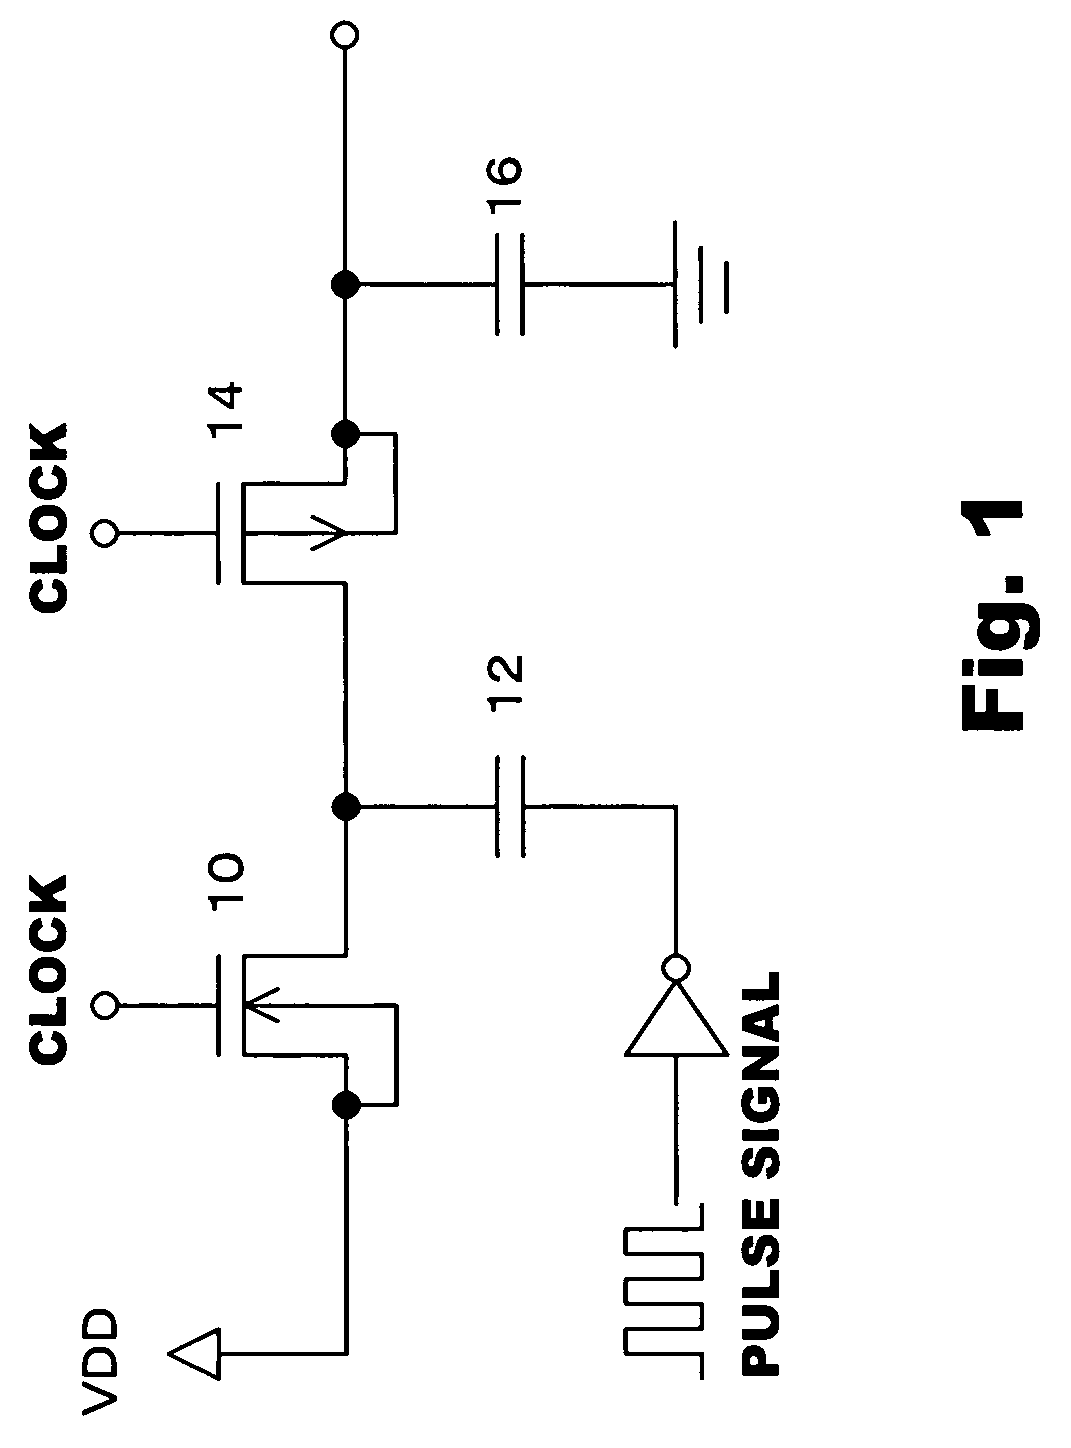 Constant current circuit used for ring oscillator and charge pump circuit